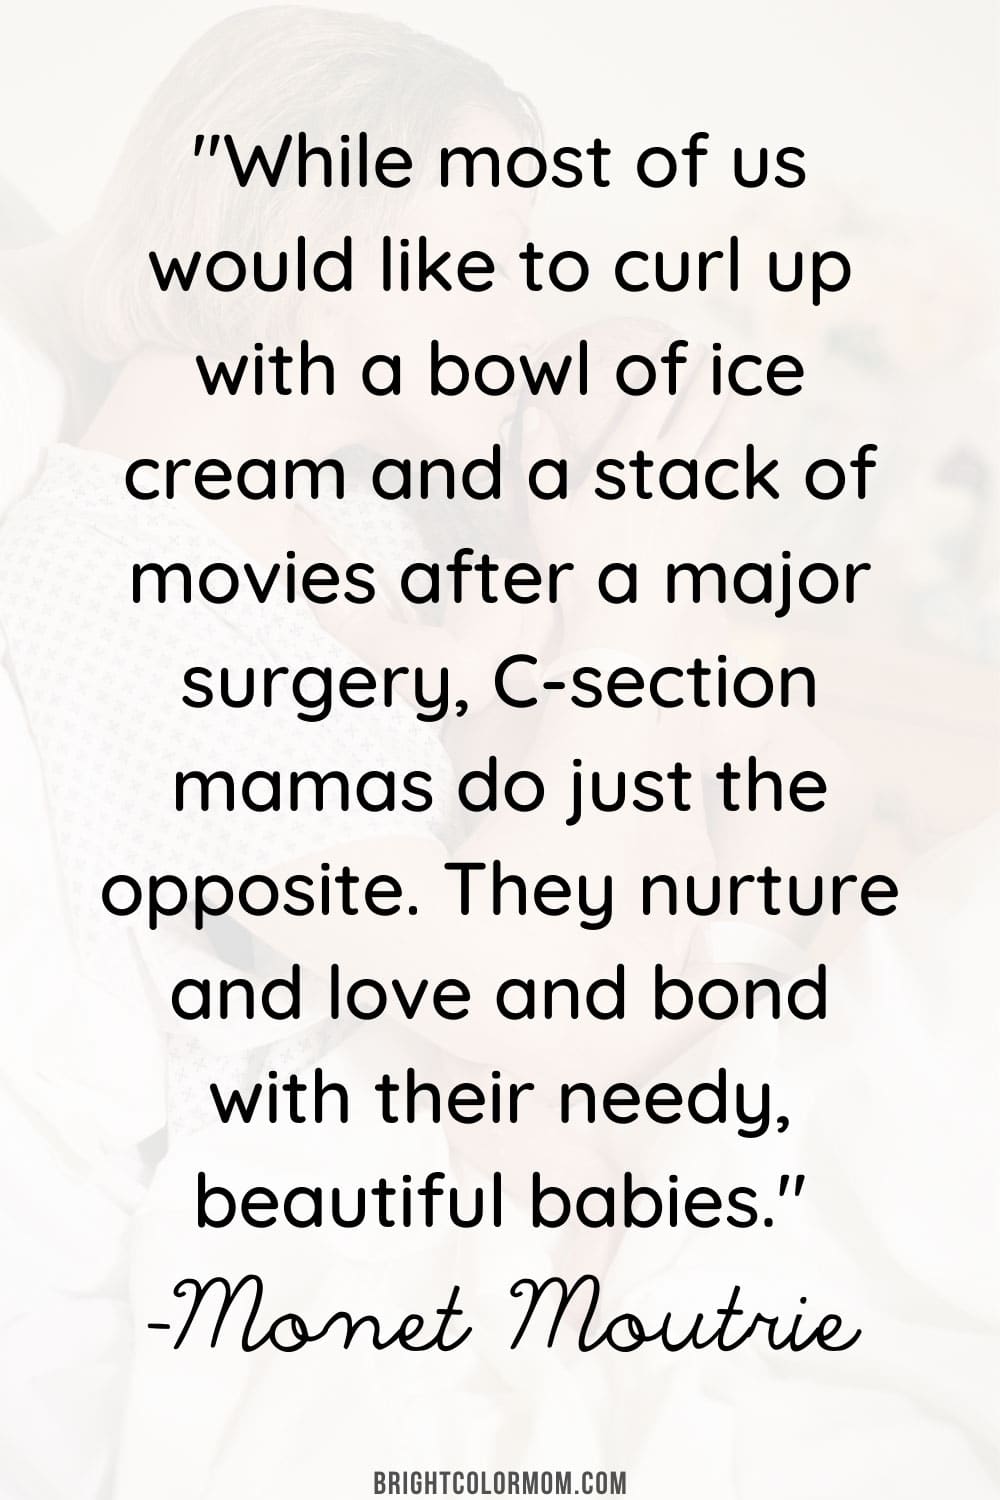 While most of us would like to curl up with a bowl of ice cream and a stack of movies after a major surgery, C-section mamas do just the opposite. They nurture and love and bond with their needy, beautiful babies.